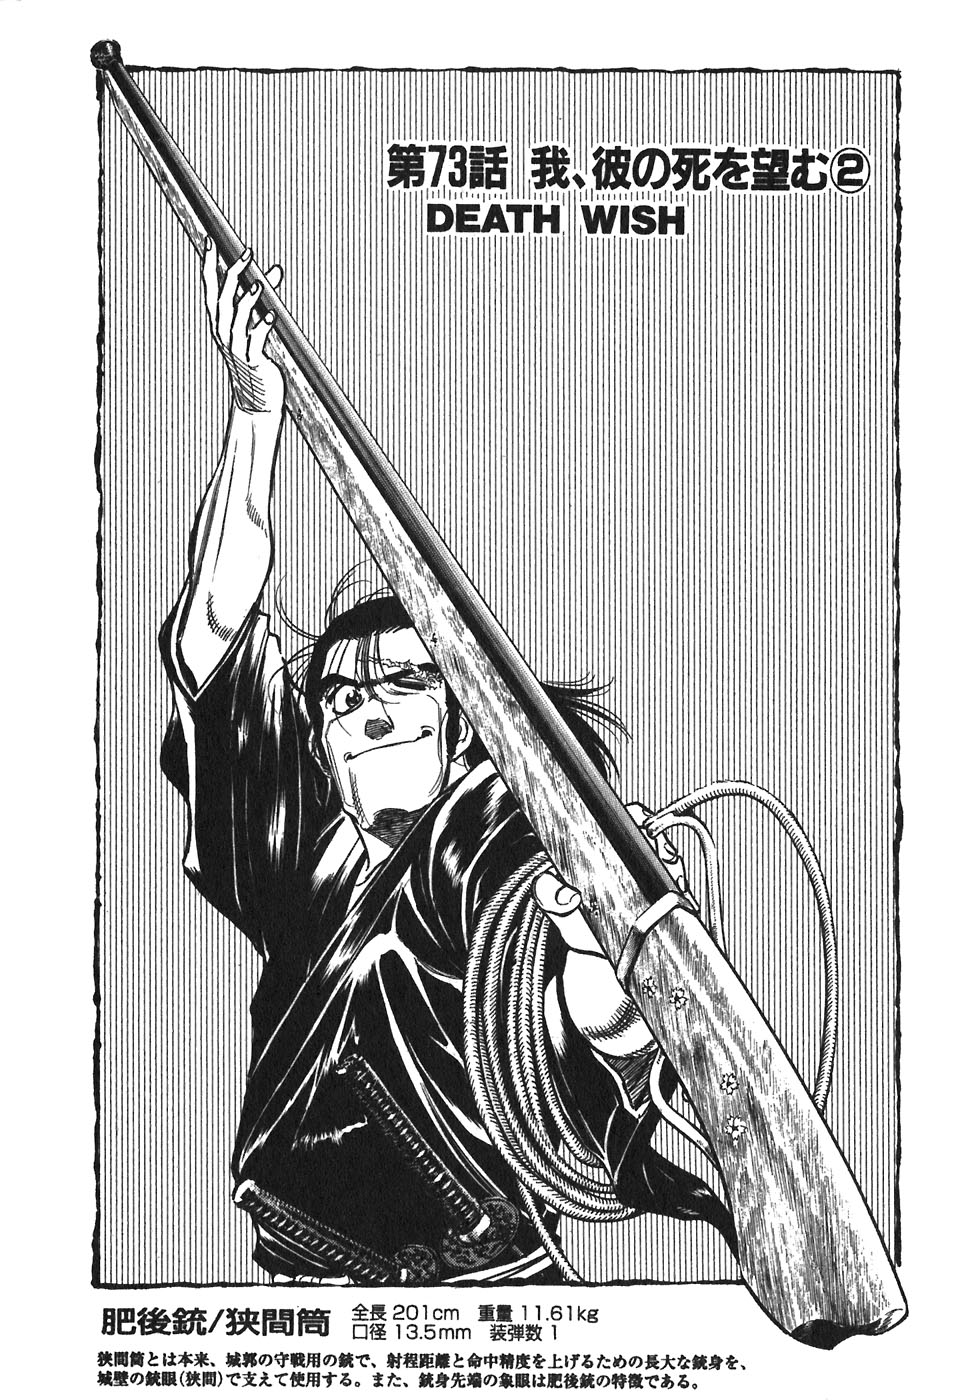 RED: Living on the Edge Vol. 10 Ch. 73 Death Wish 2